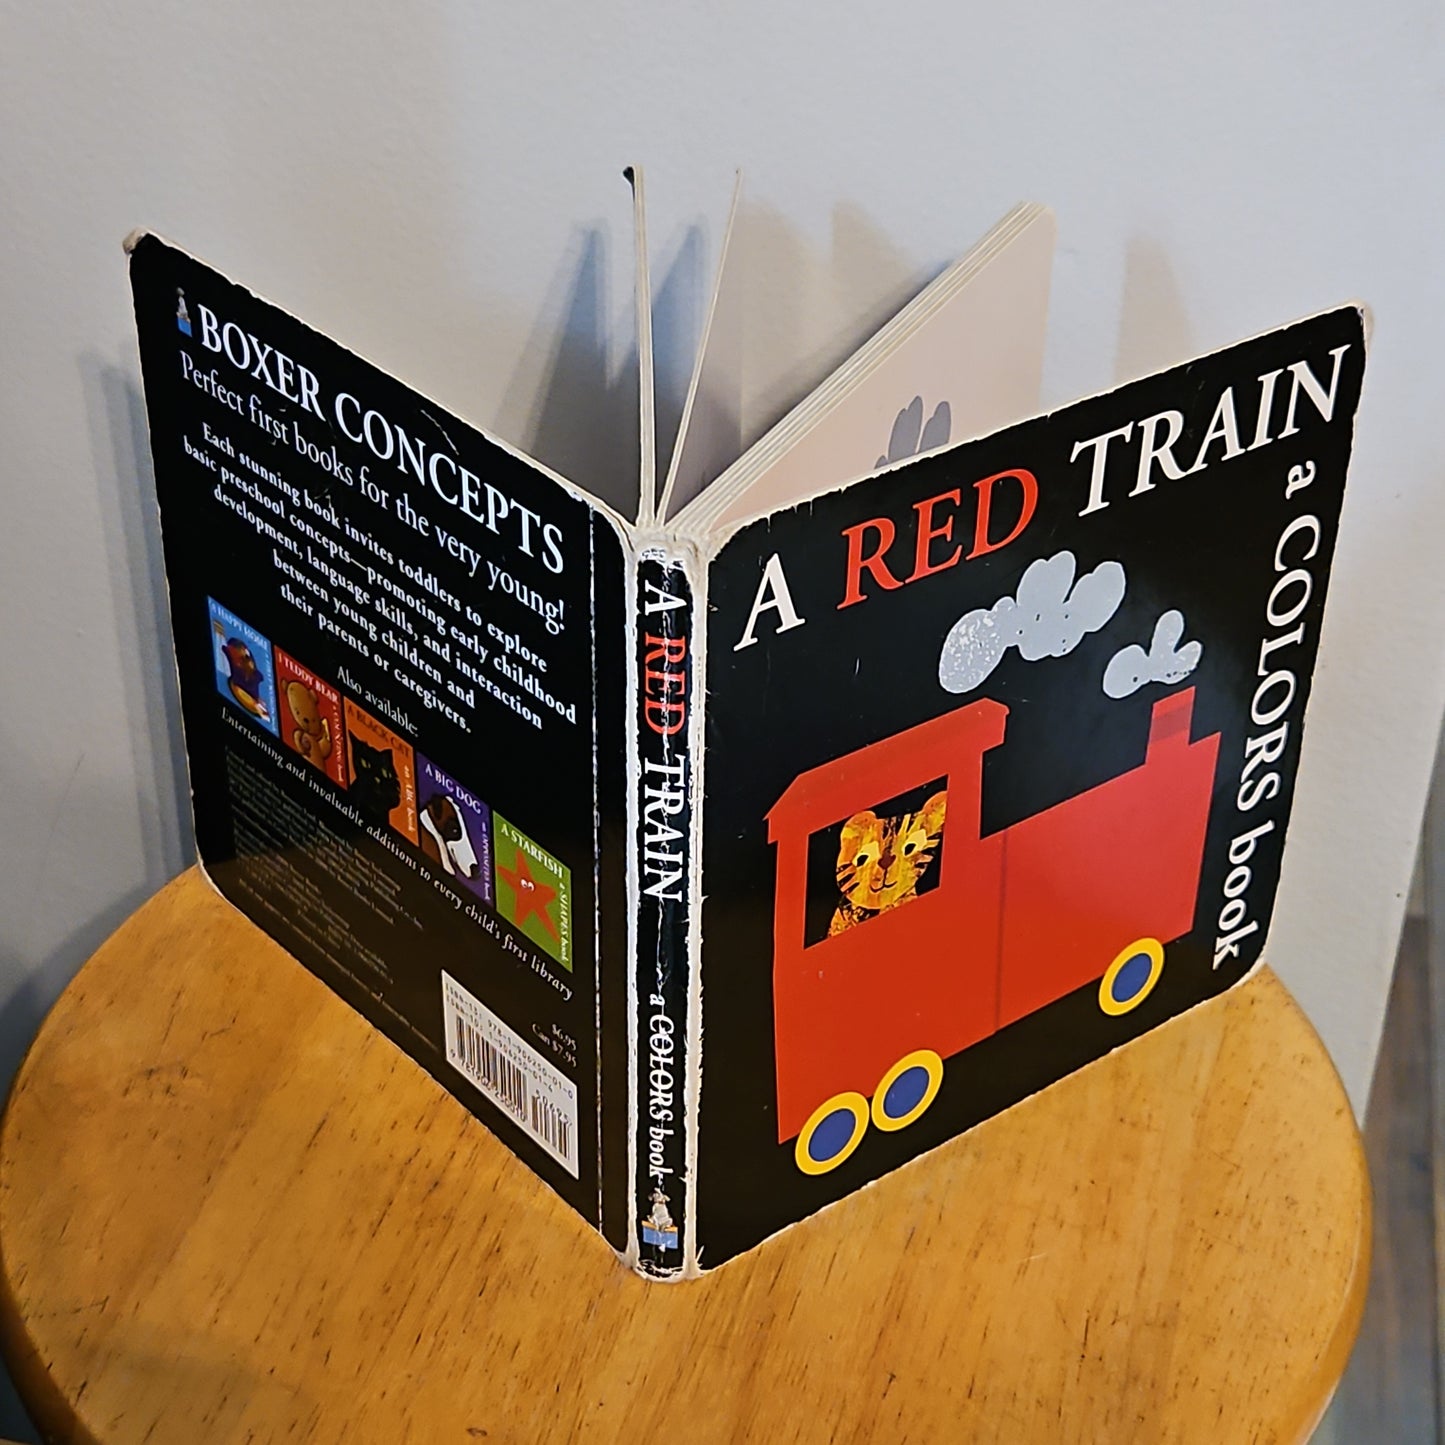 A Red Train A Colors Book By Bernette Ford Illustrated By Britta Teckentrup